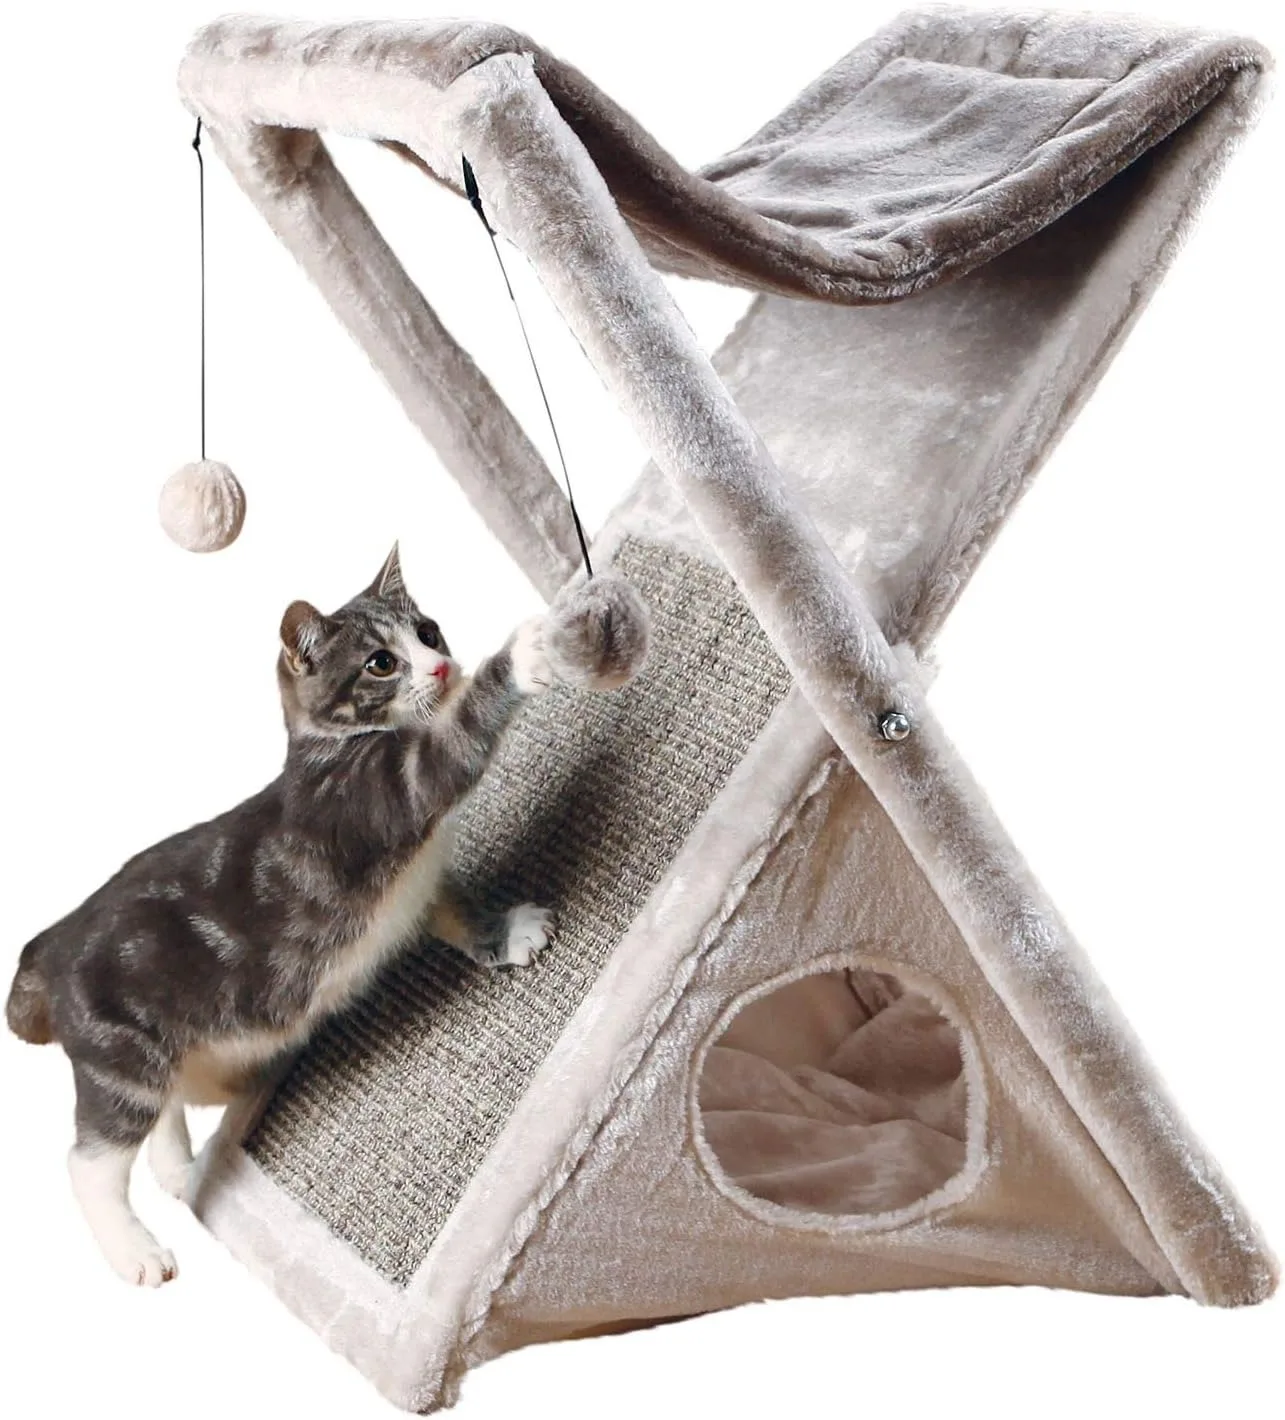 

Fold and Store Cat Hammock, Dangling Cat Toy, Scratching Pad, Cat Cave, Taupe/Light Gray 20.25 x 13.75 x 25.5 inches